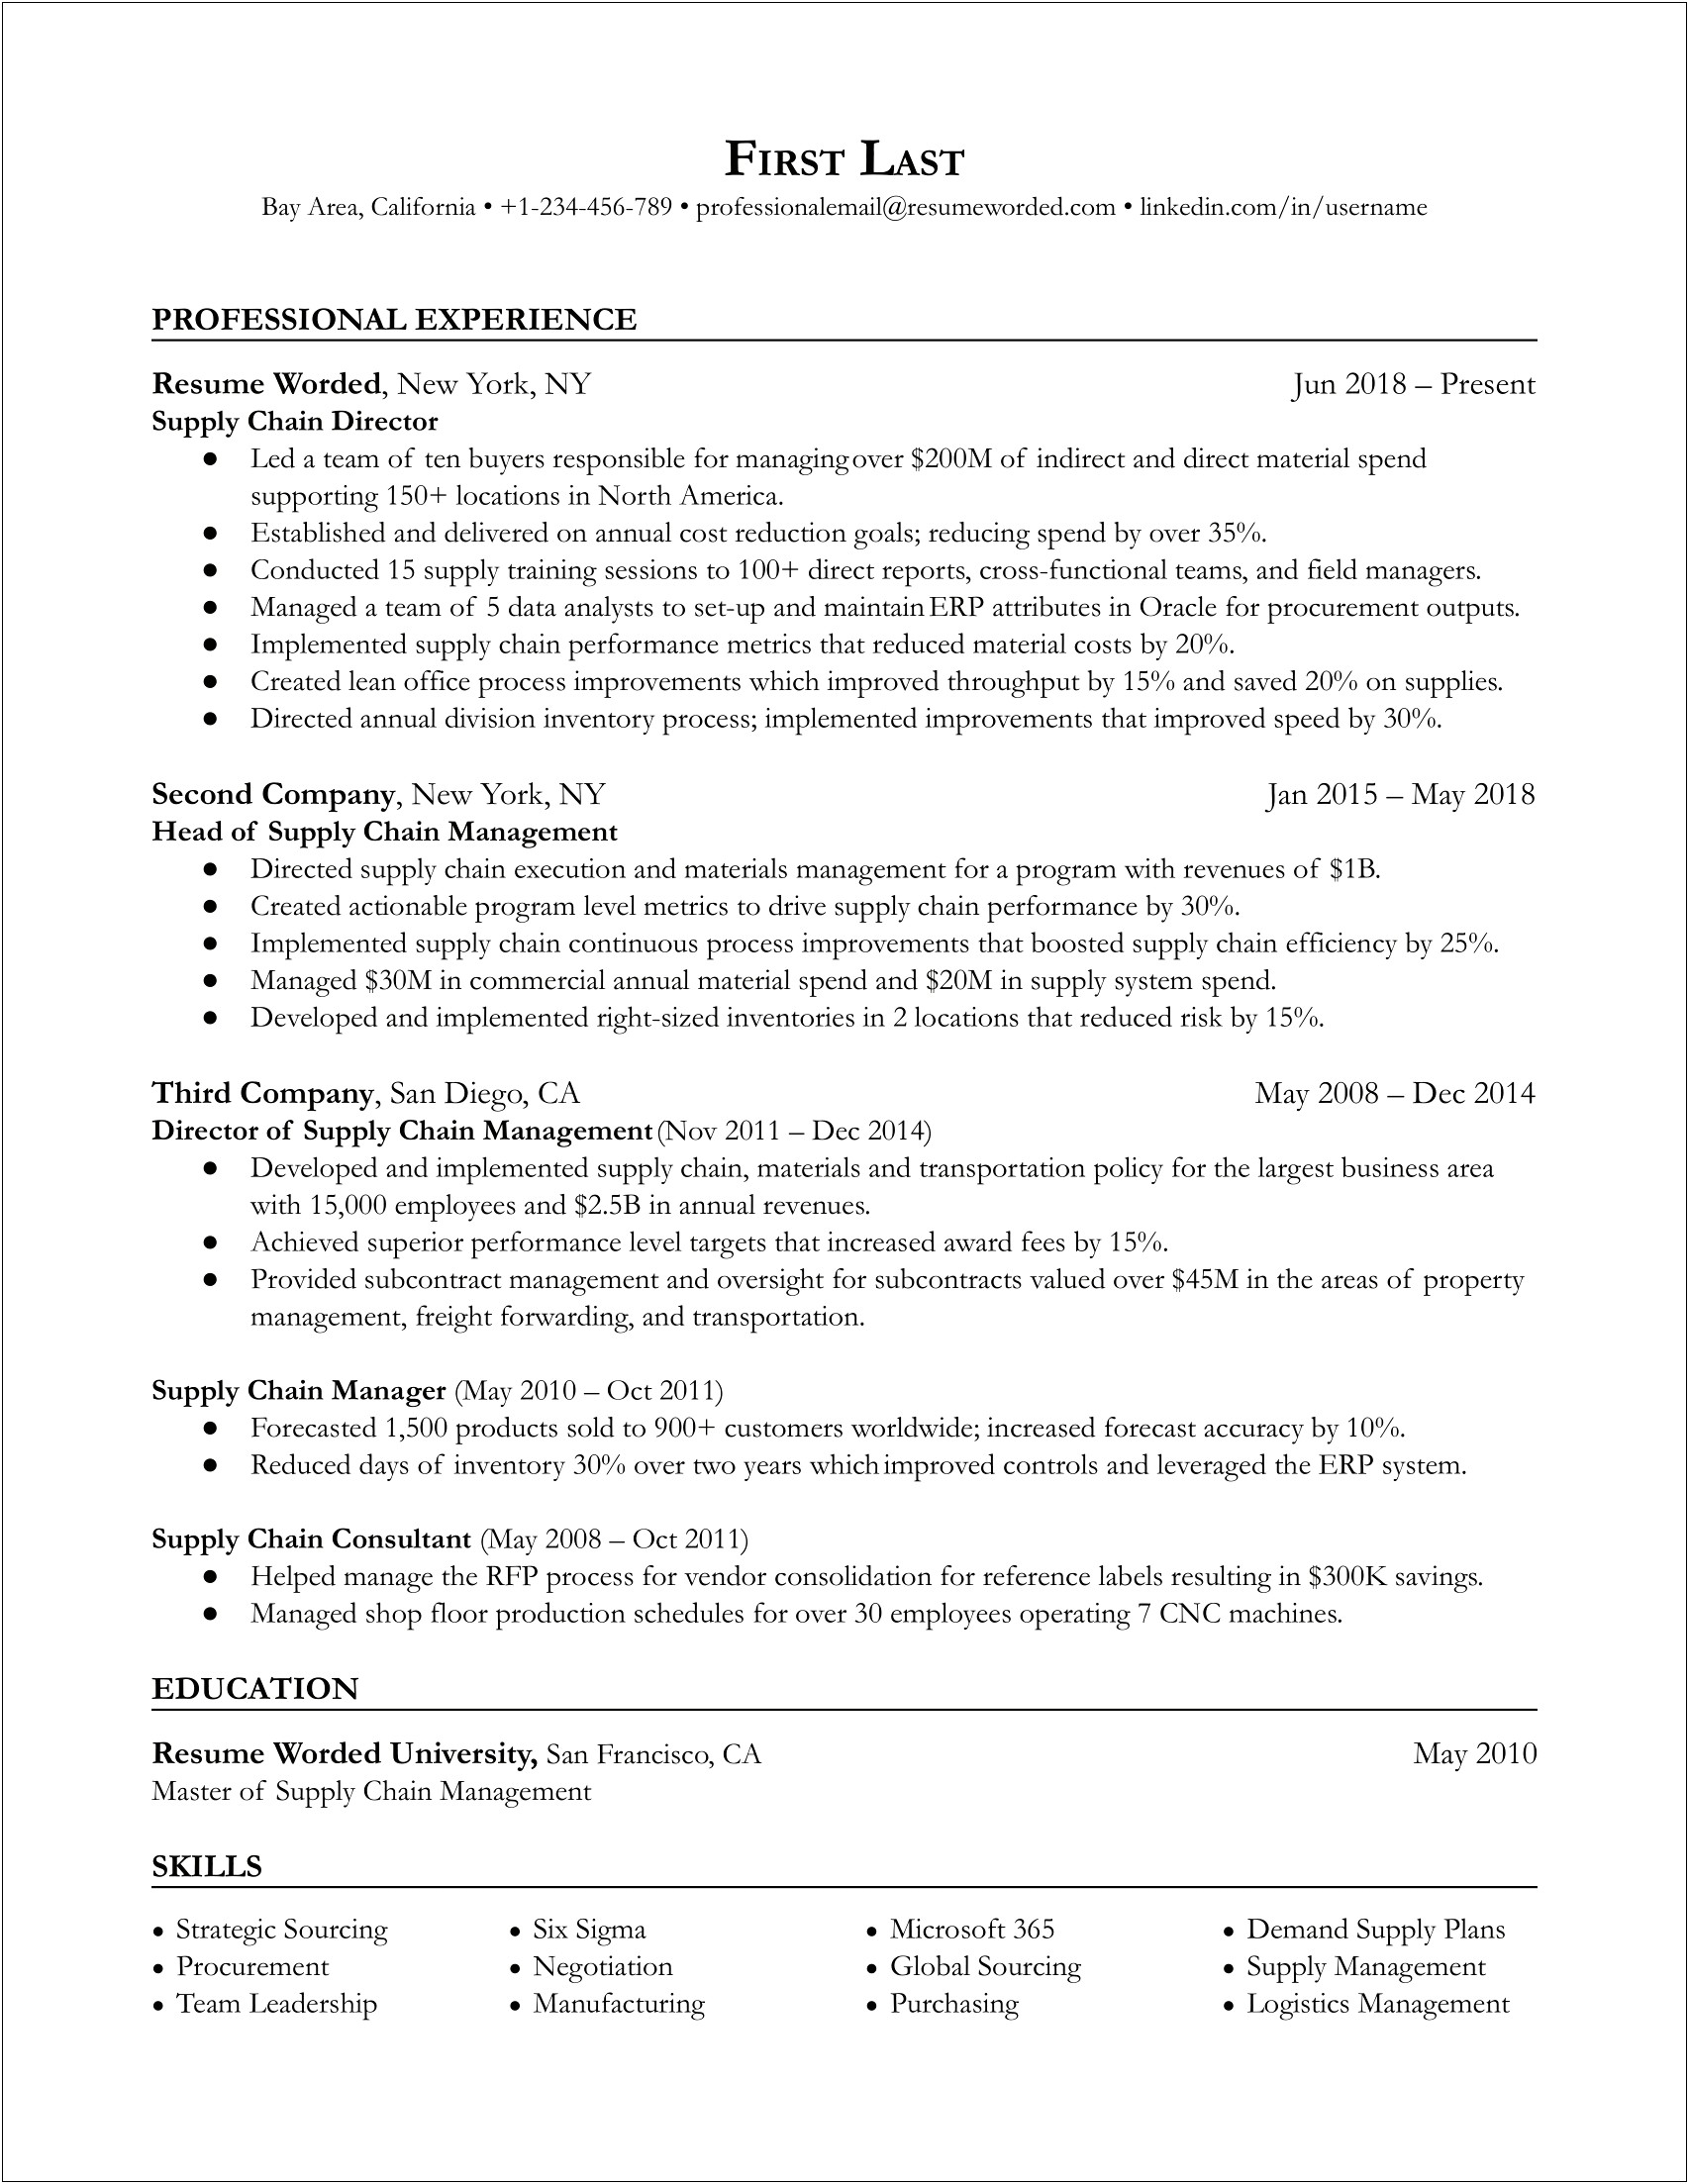 Supply Chain Management Resume Templates